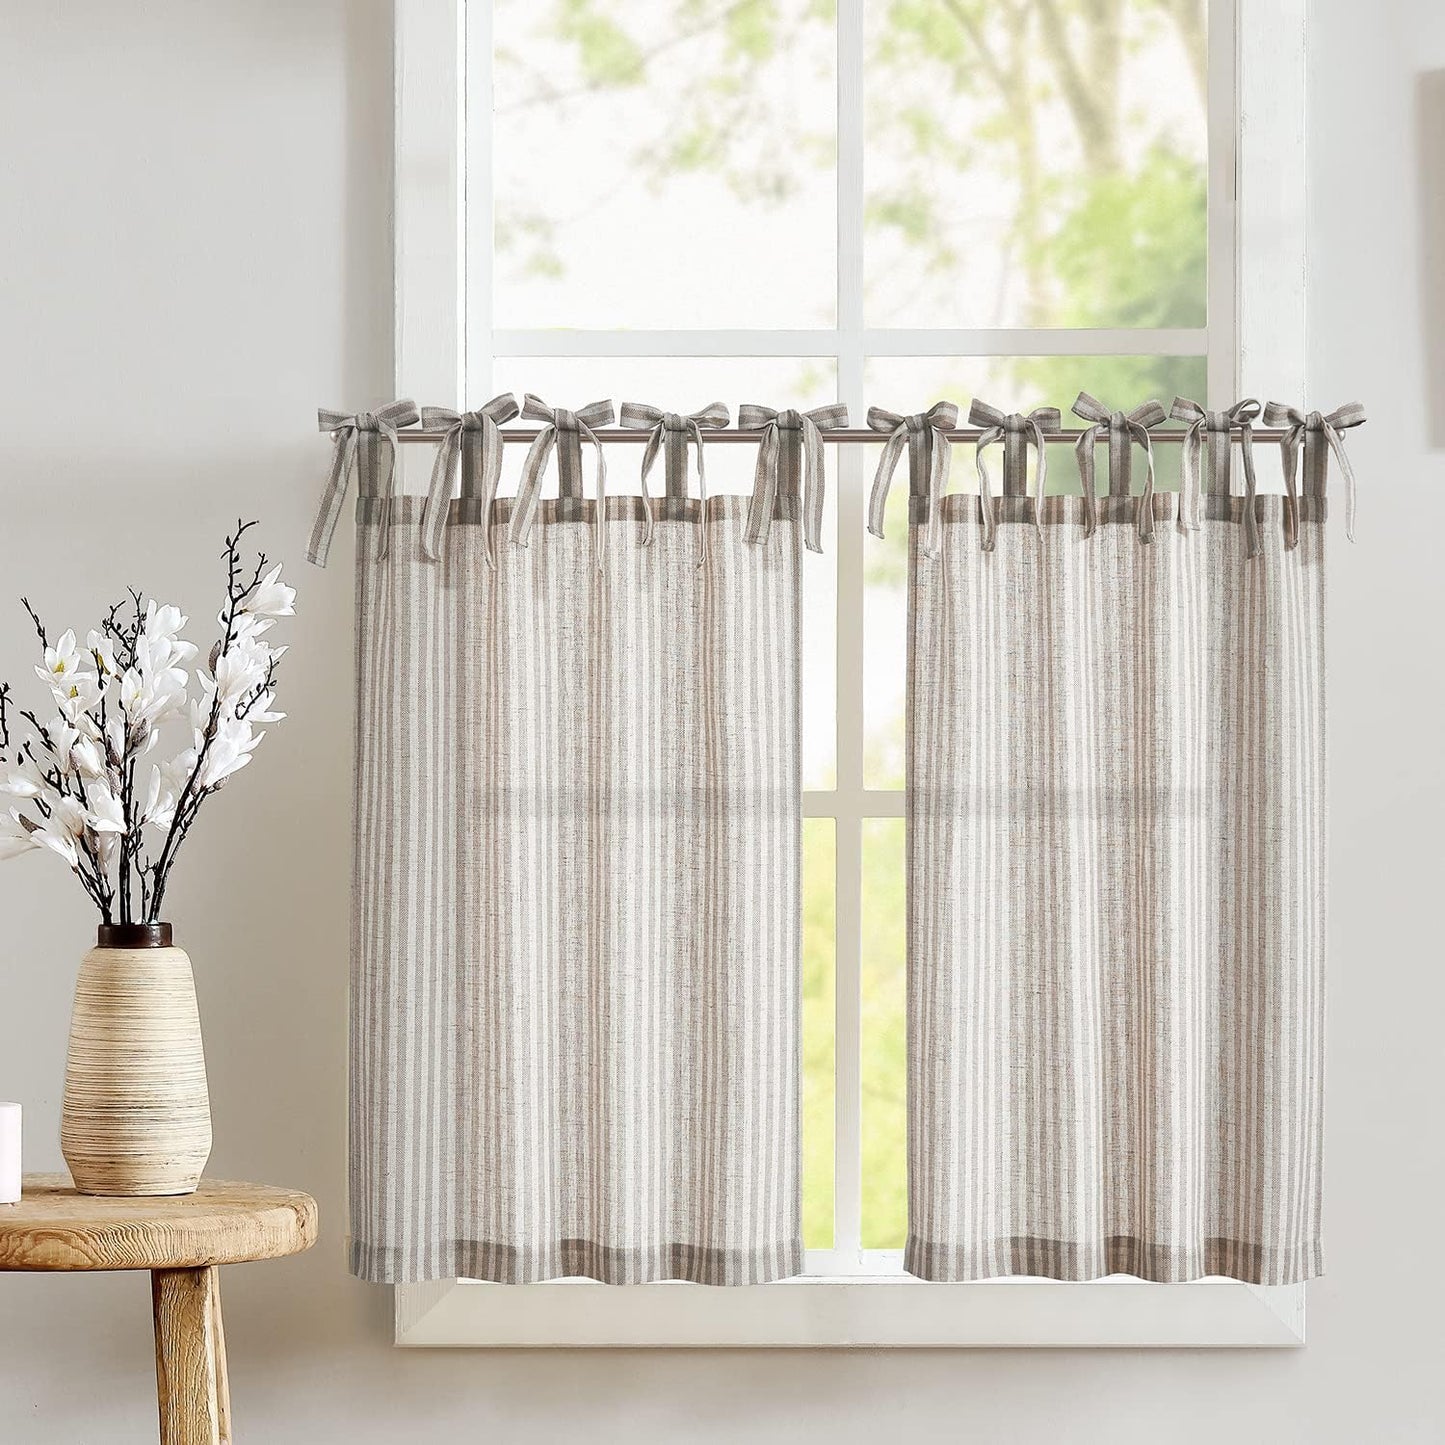 Jinchan Kitchen Curtains Striped Tier Curtains Ticking Stripe Linen Curtains Pinstripe Cafe Curtains 24 Inch Length for Living Room Bathroom Farmhouse Curtains Rod Pocket 2 Panels Black on Beige  CKNY HOME FASHION Tie Top Striped Taupe W26 X L24 